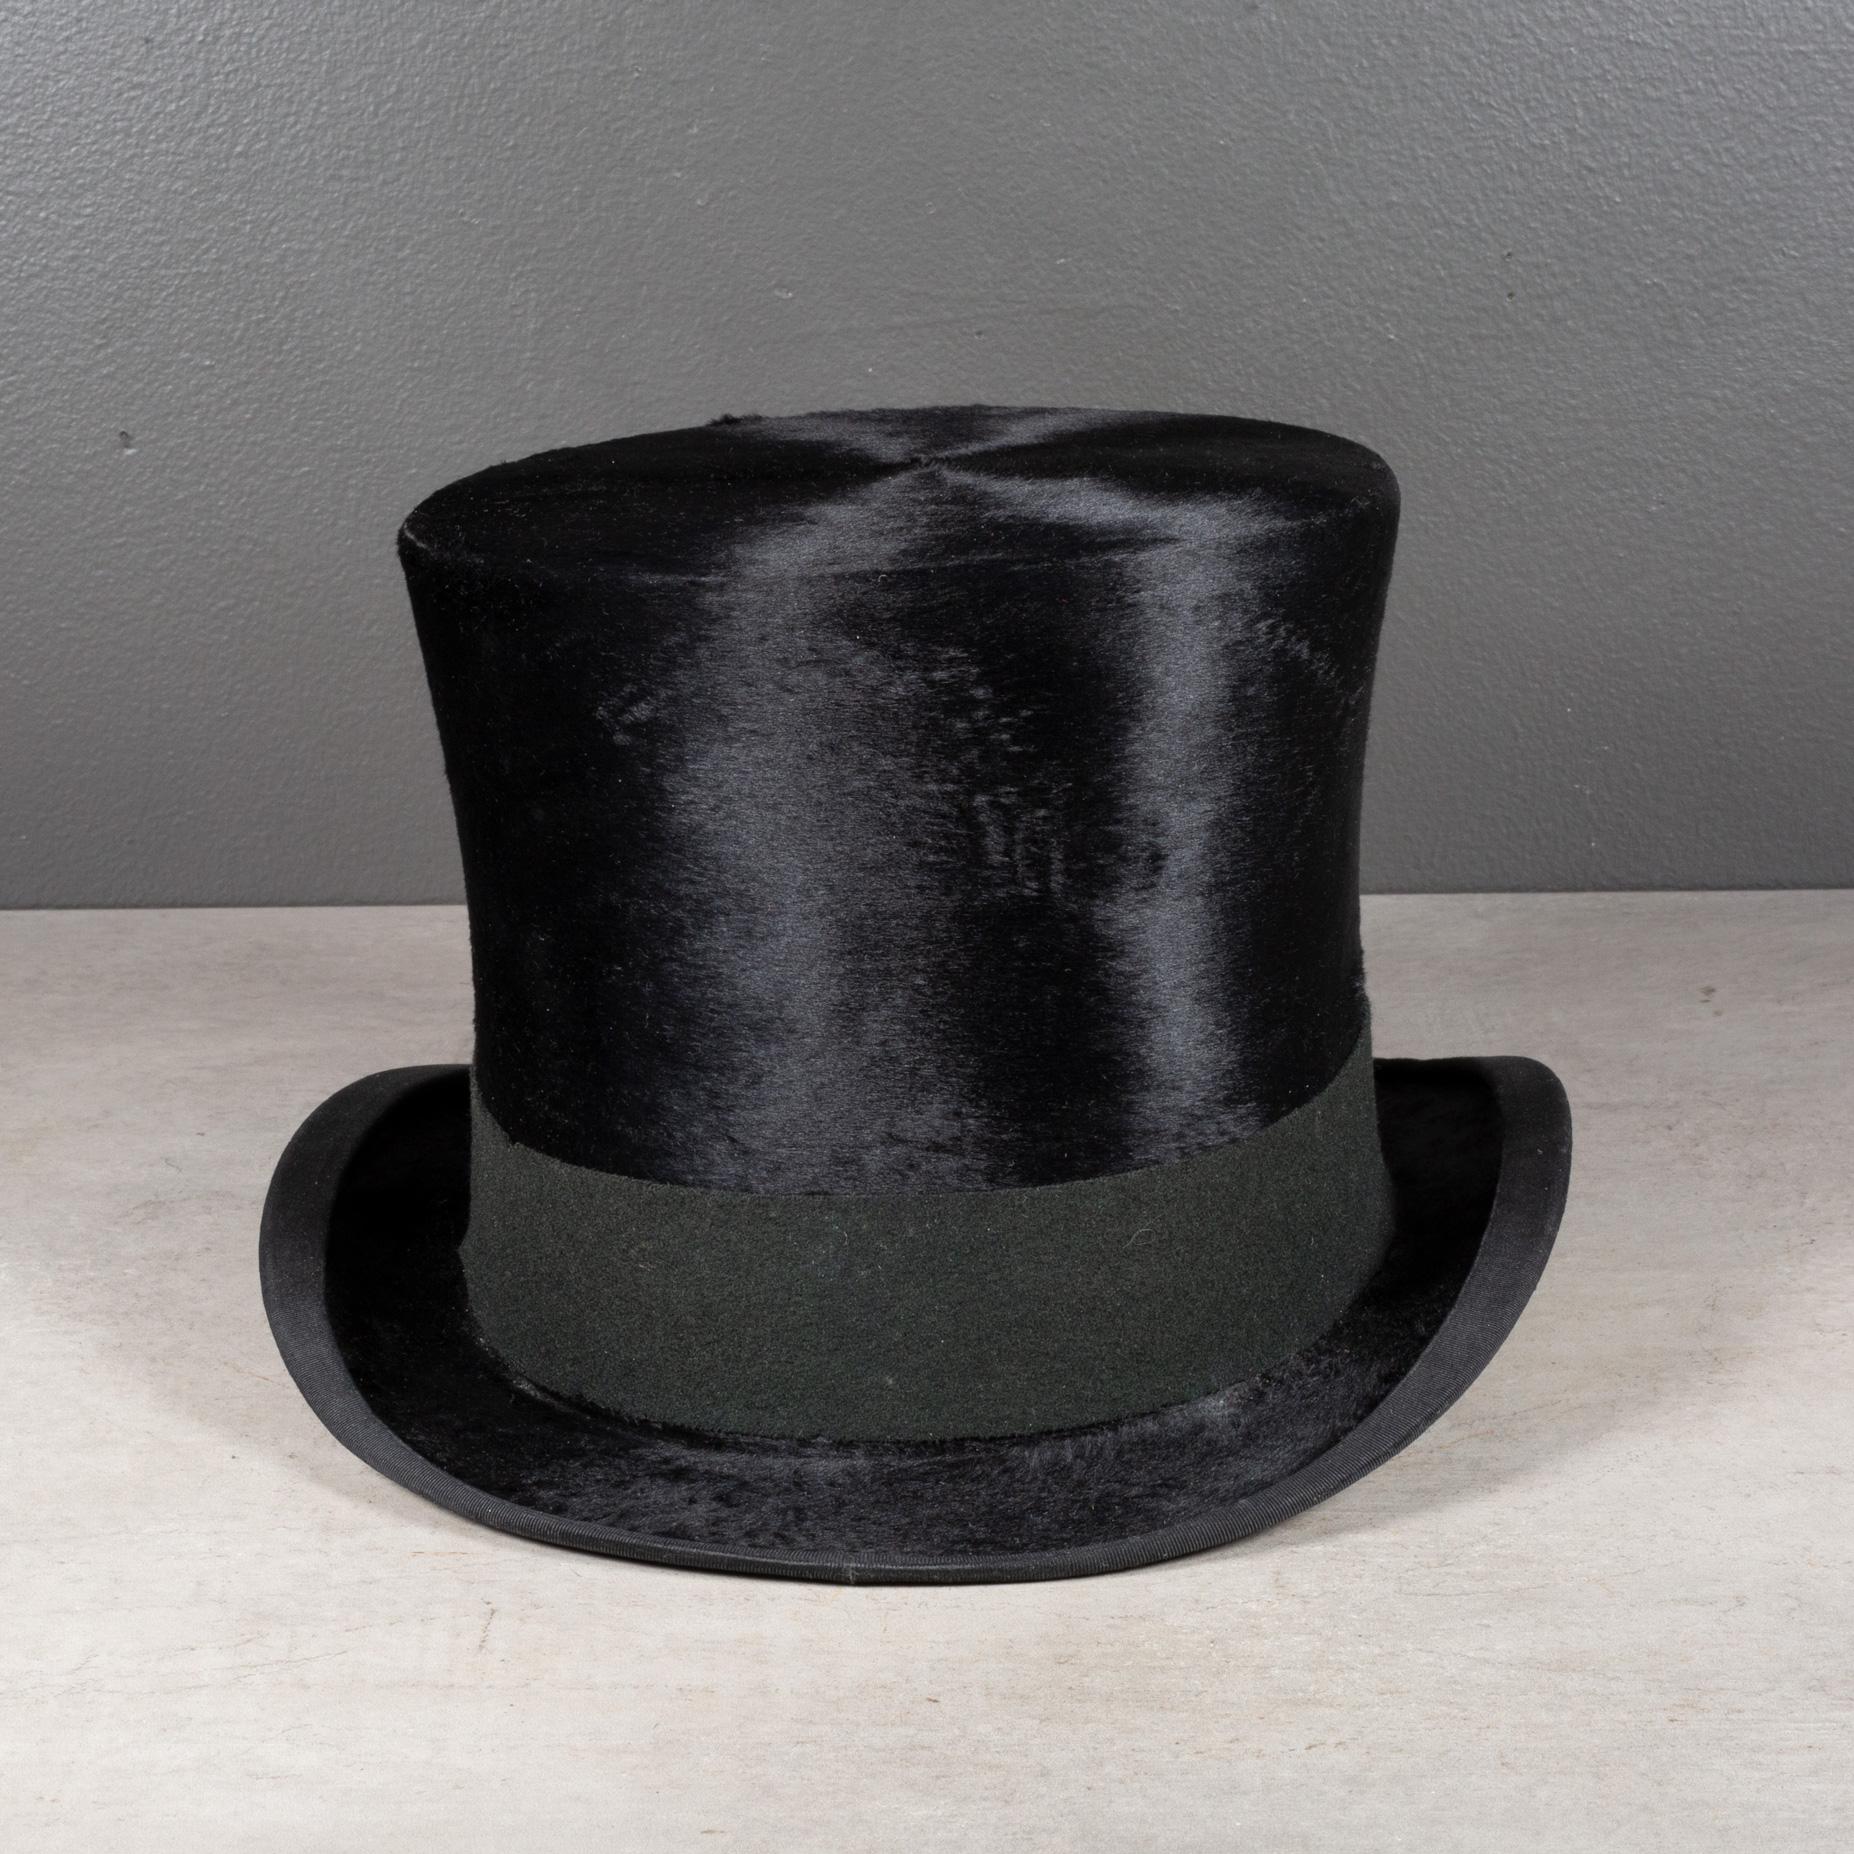 American Antique Beaver Skin Top Hat c.1890-1920  (FREE SHIPPING) For Sale